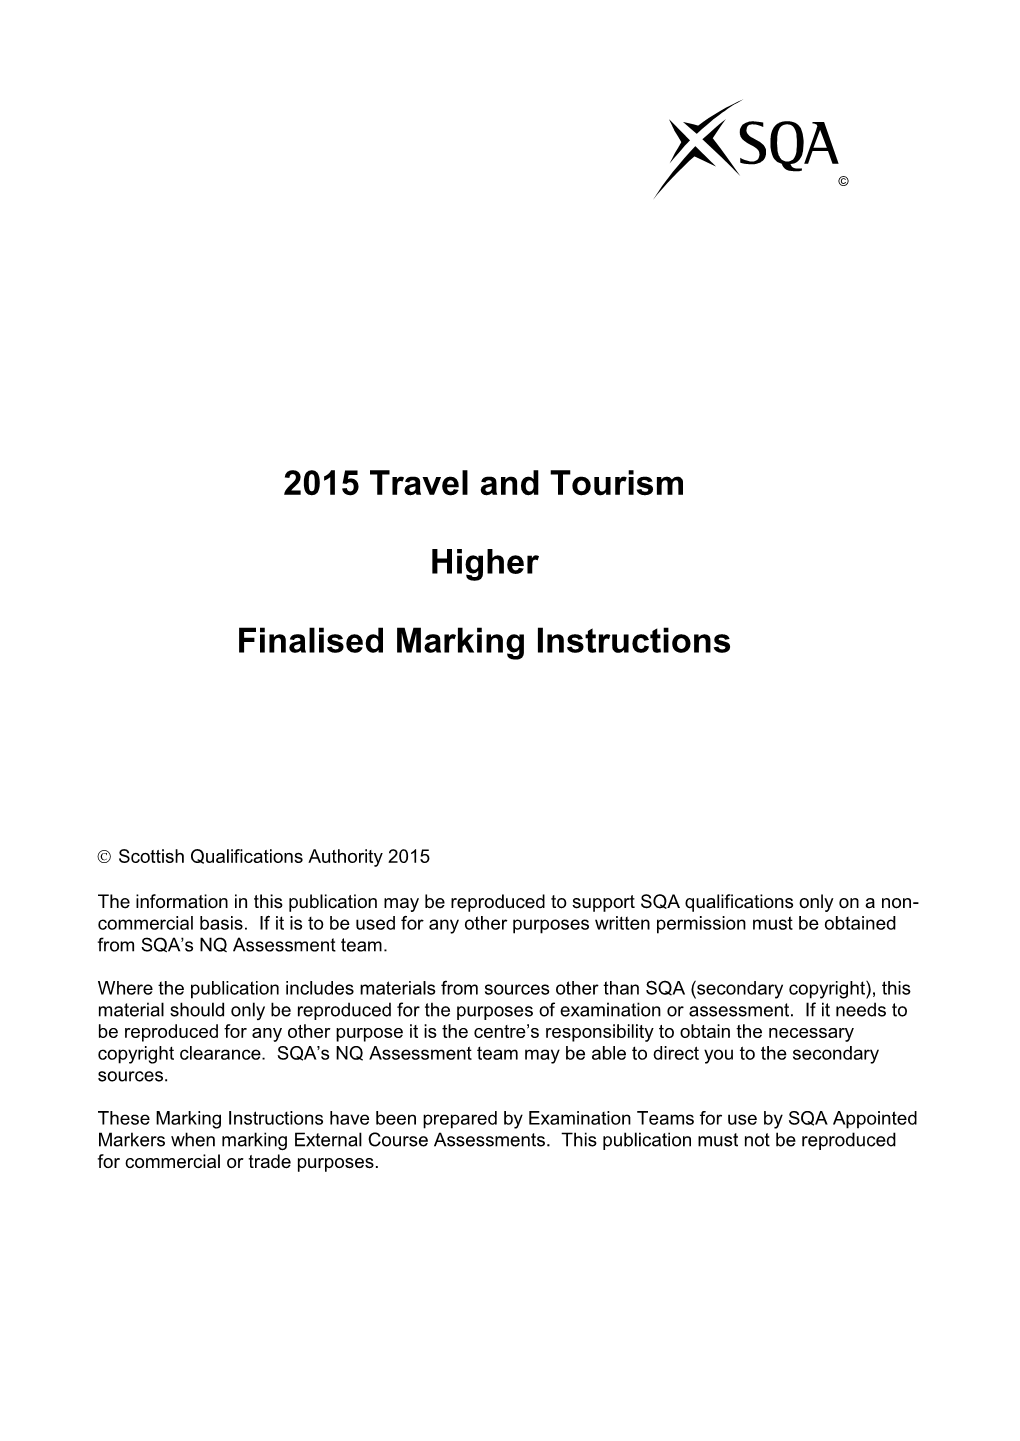 2015 Travel and Tourism Higher Finalised Marking Instructions